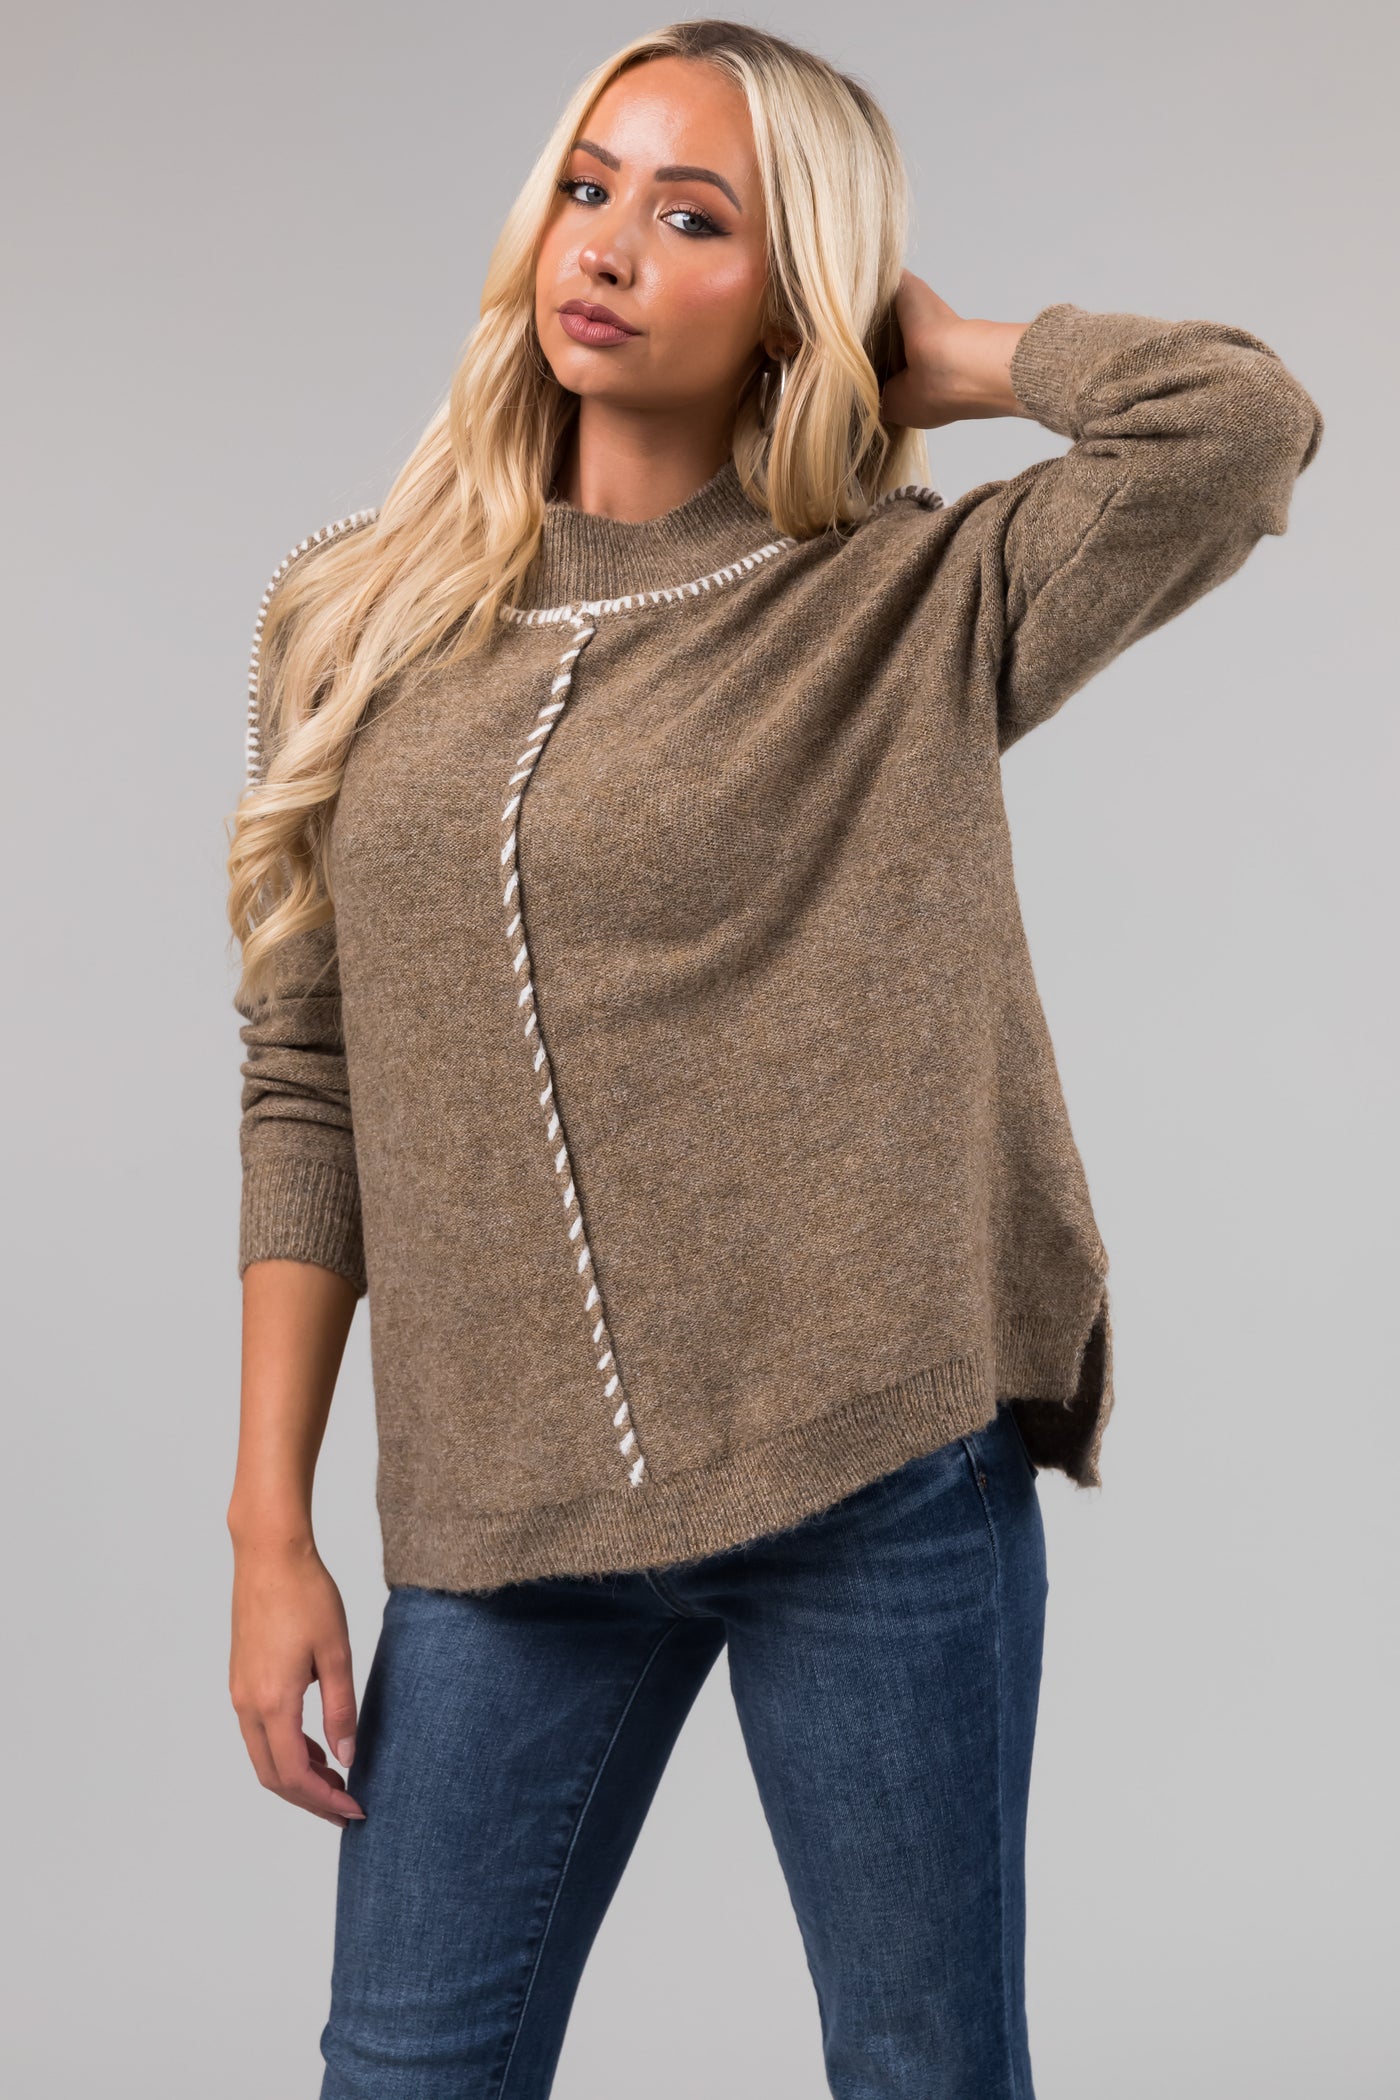 Dusty Olive Mock Neck Stitching Detail Sweater